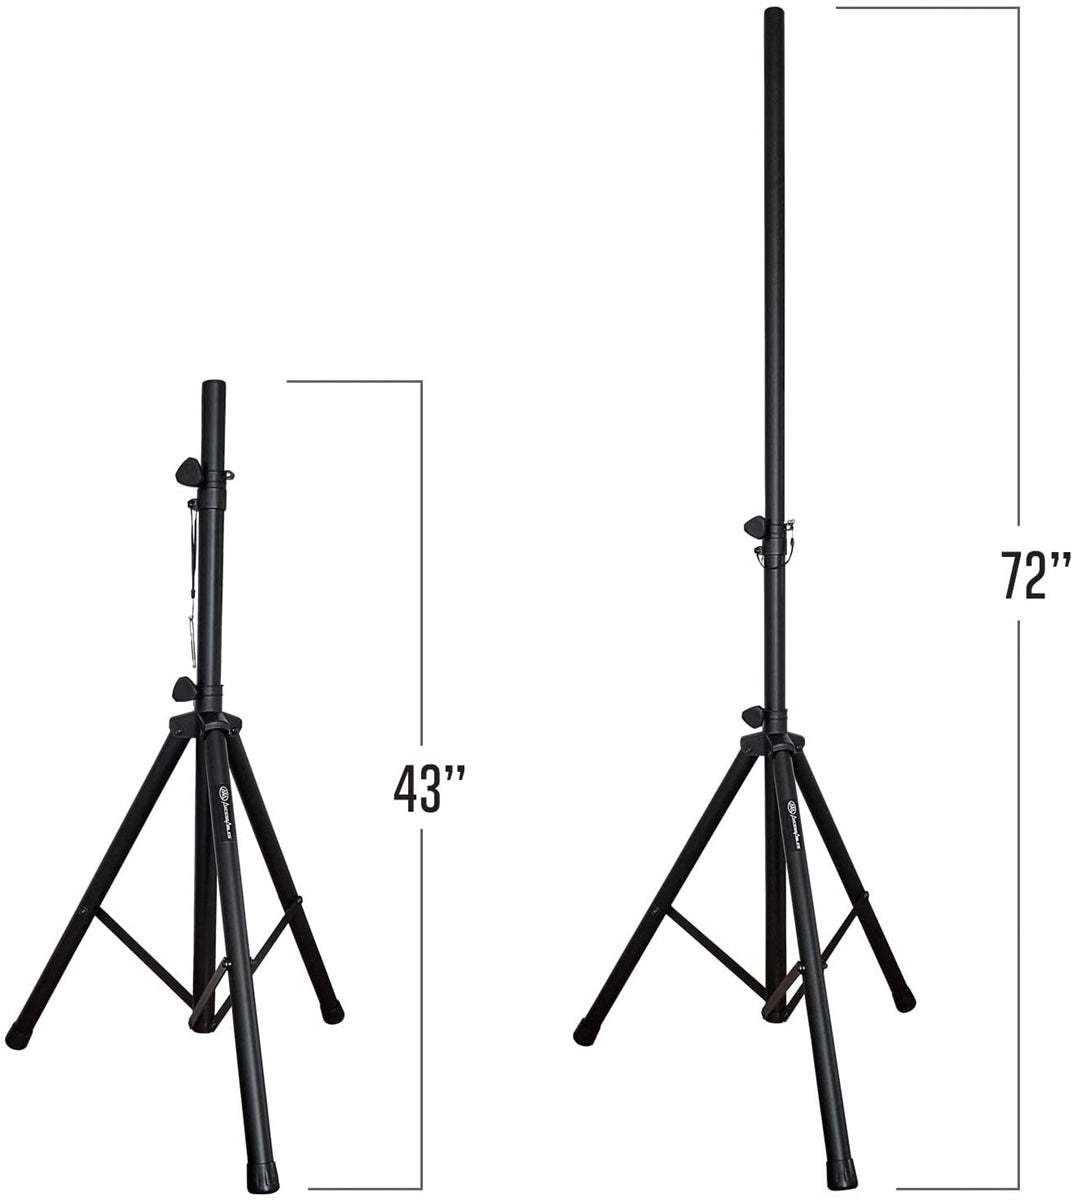 AxcessAbles Heavy-Duty DJ Tripod Stands (Pair) with Bag | Adjustable Height  42-inch to 72-inch PA Speaker Stands| 15lb Portable PA Stands Compatible